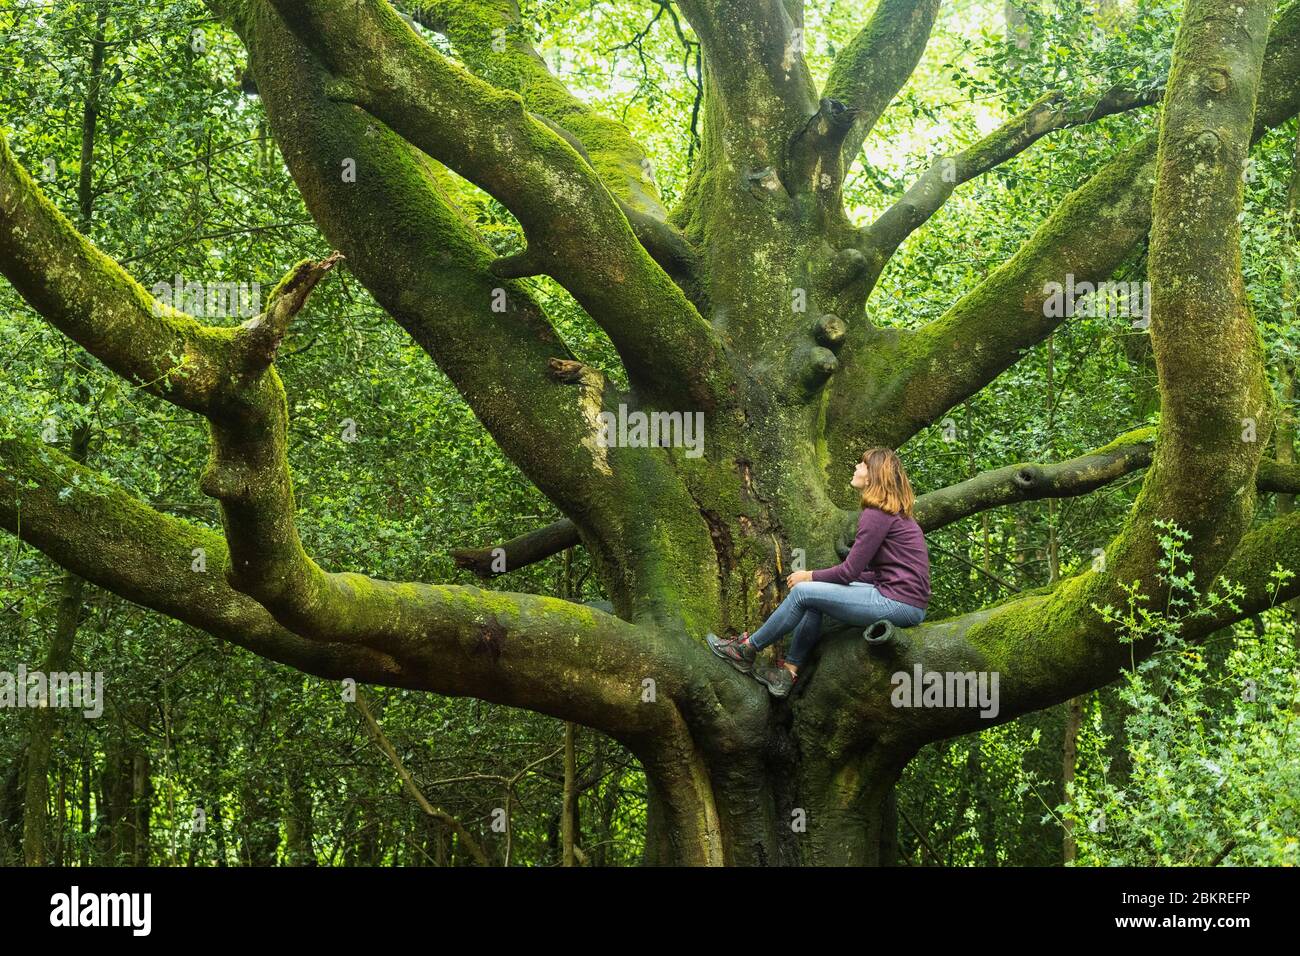 France, Ille-et-Vilaine, Paimpont, young woman in a beech (Fagus sylvatica) in the Broceliande forest Stock Photo